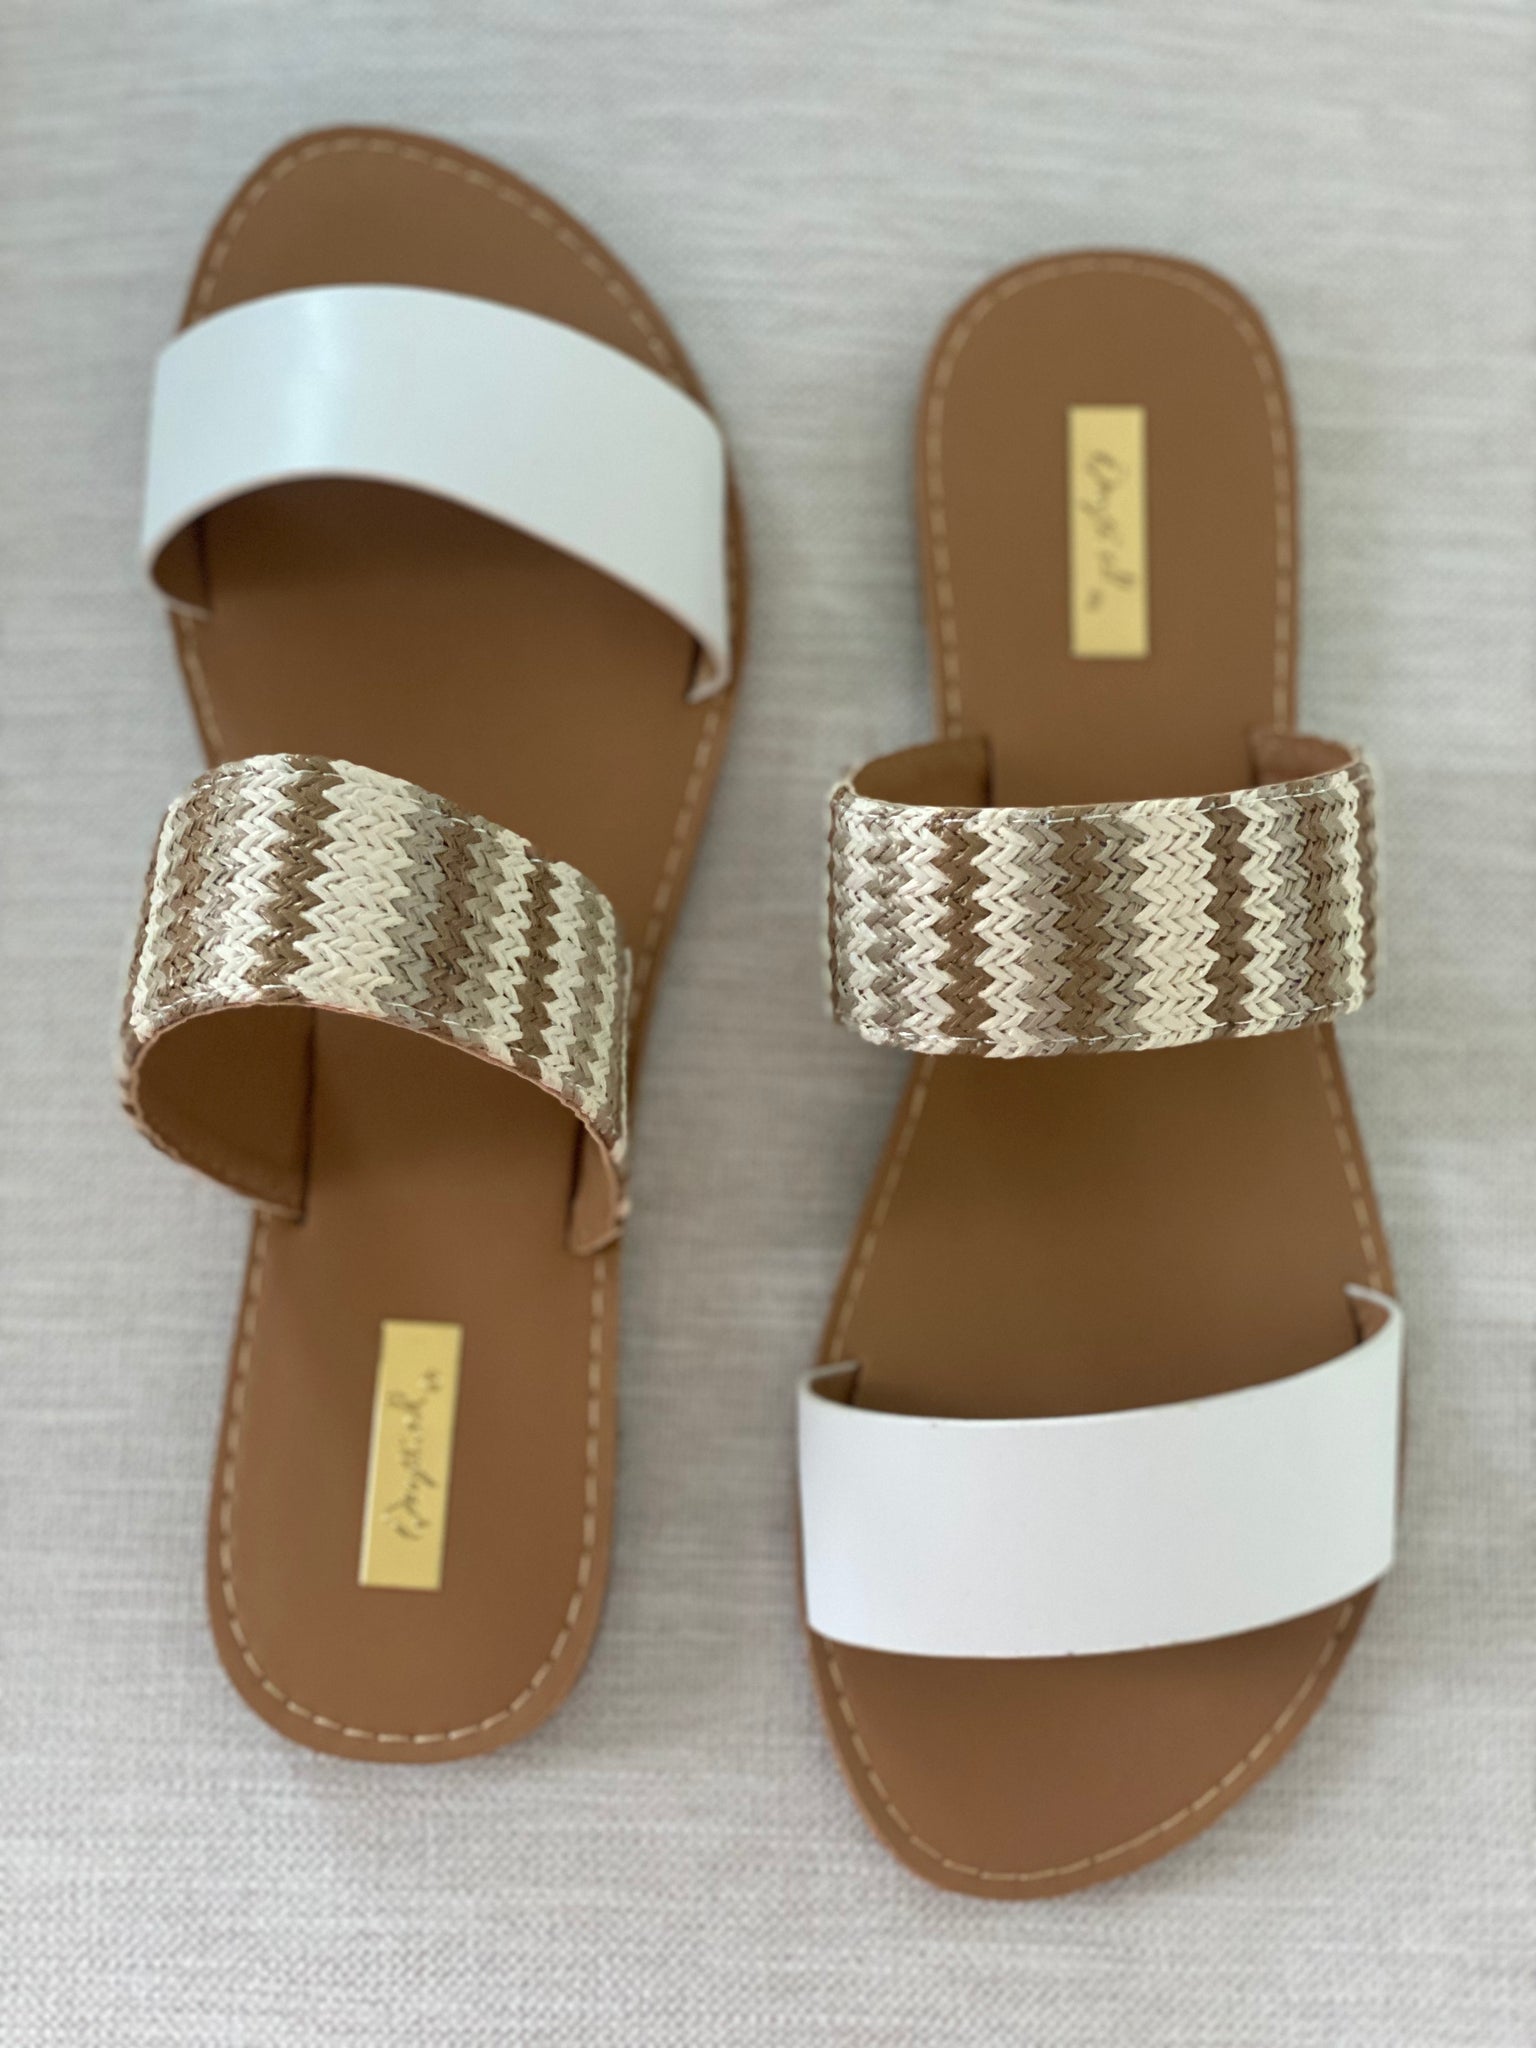 White and Tan Slide Sandals